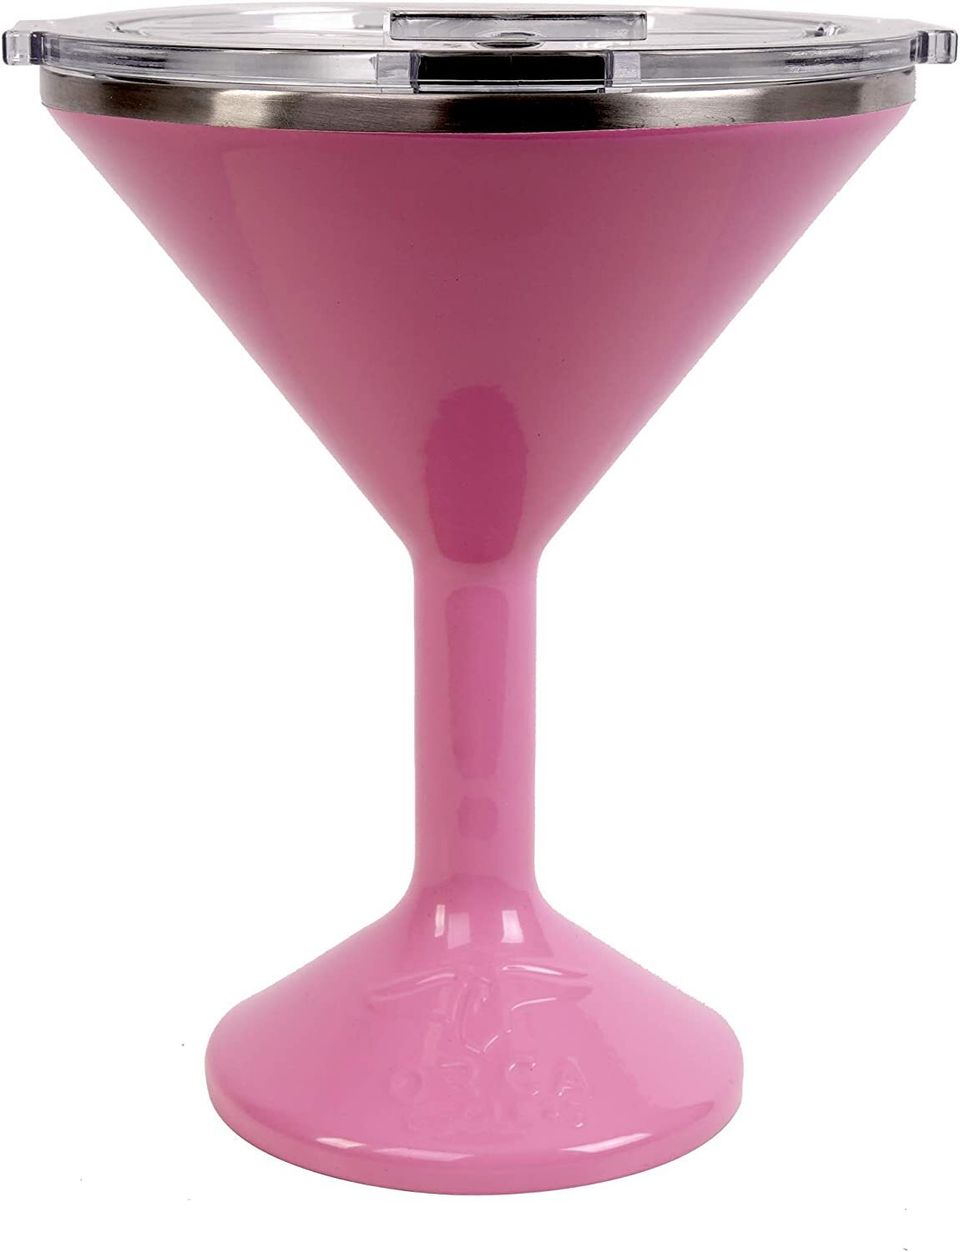 An insulated martini glass to keep it classy while camping